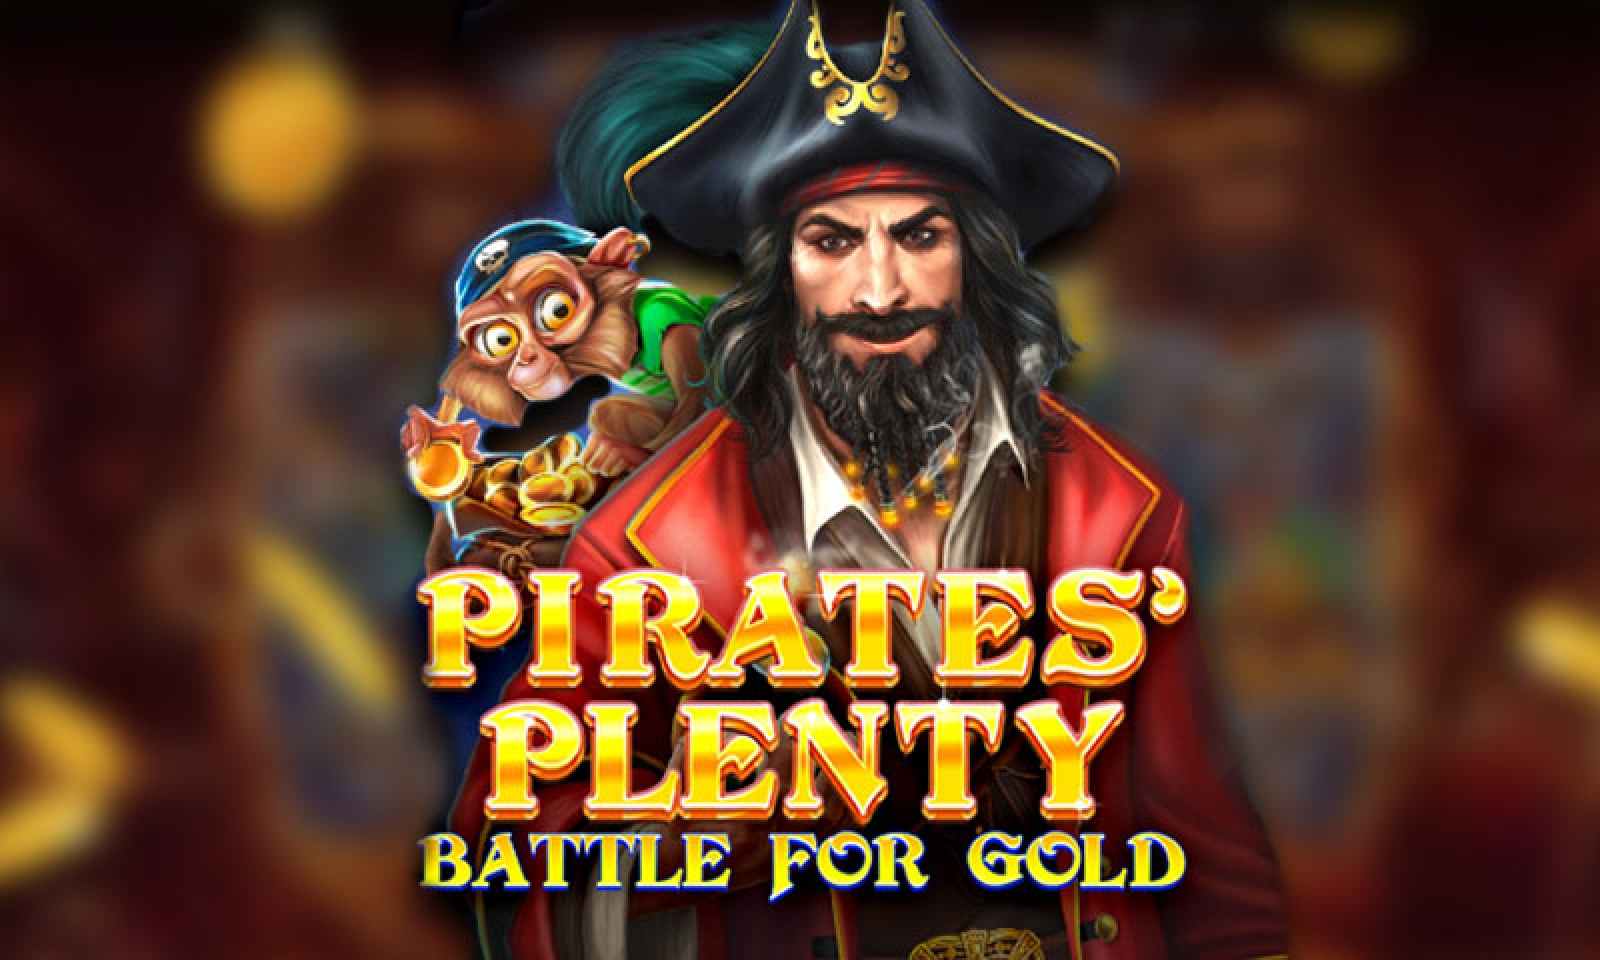 The Pirates Plenty Battle for Gold Online Slot Demo Game by Red Tiger Gaming